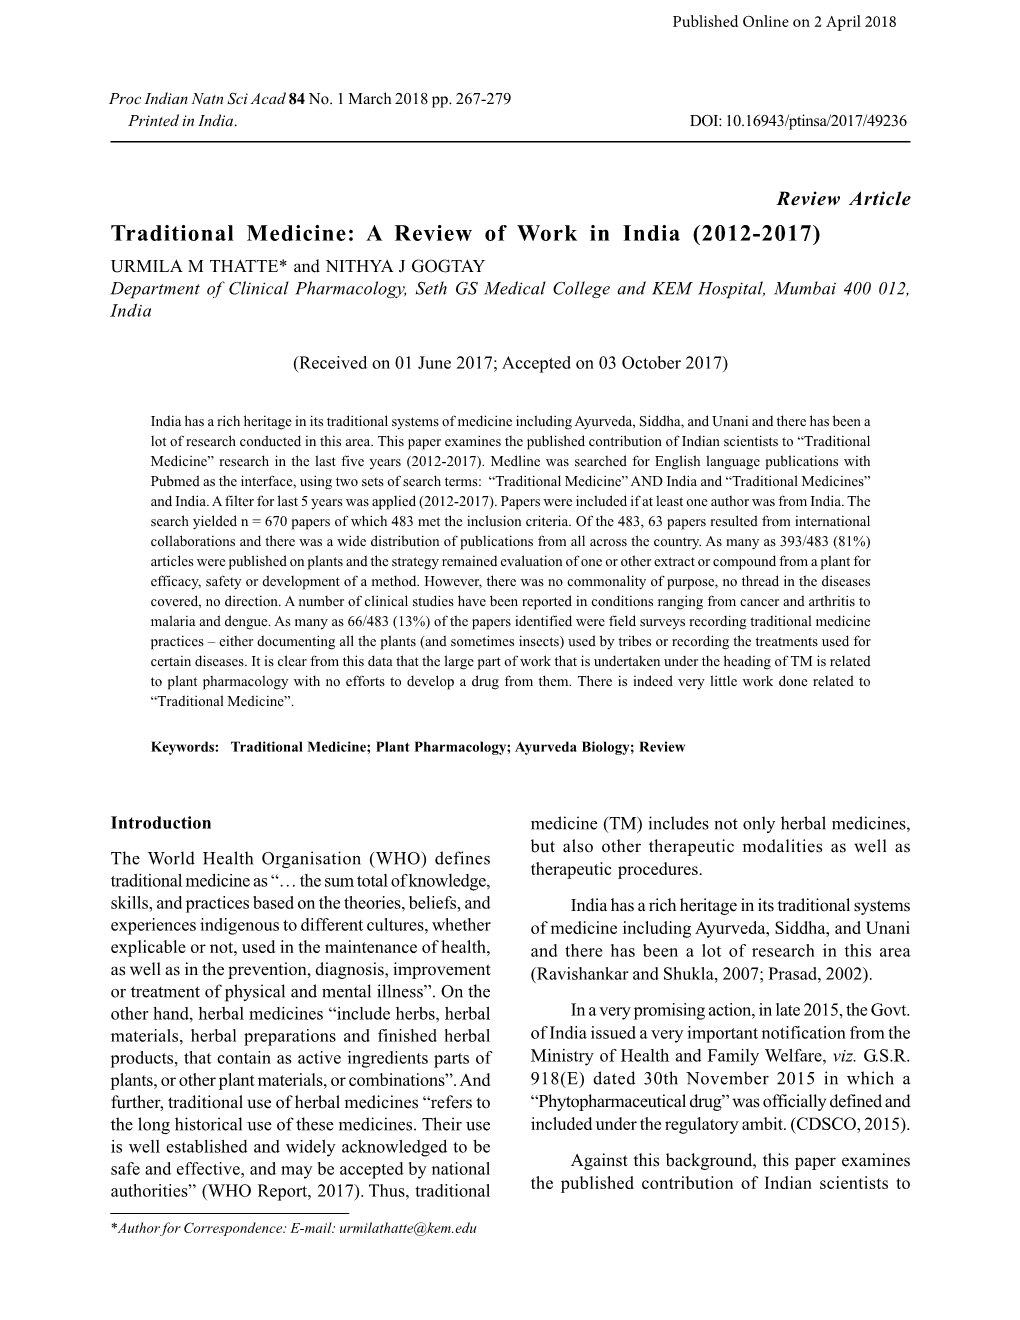 Traditional Medicine: a Review of Work in India (2012-2017)